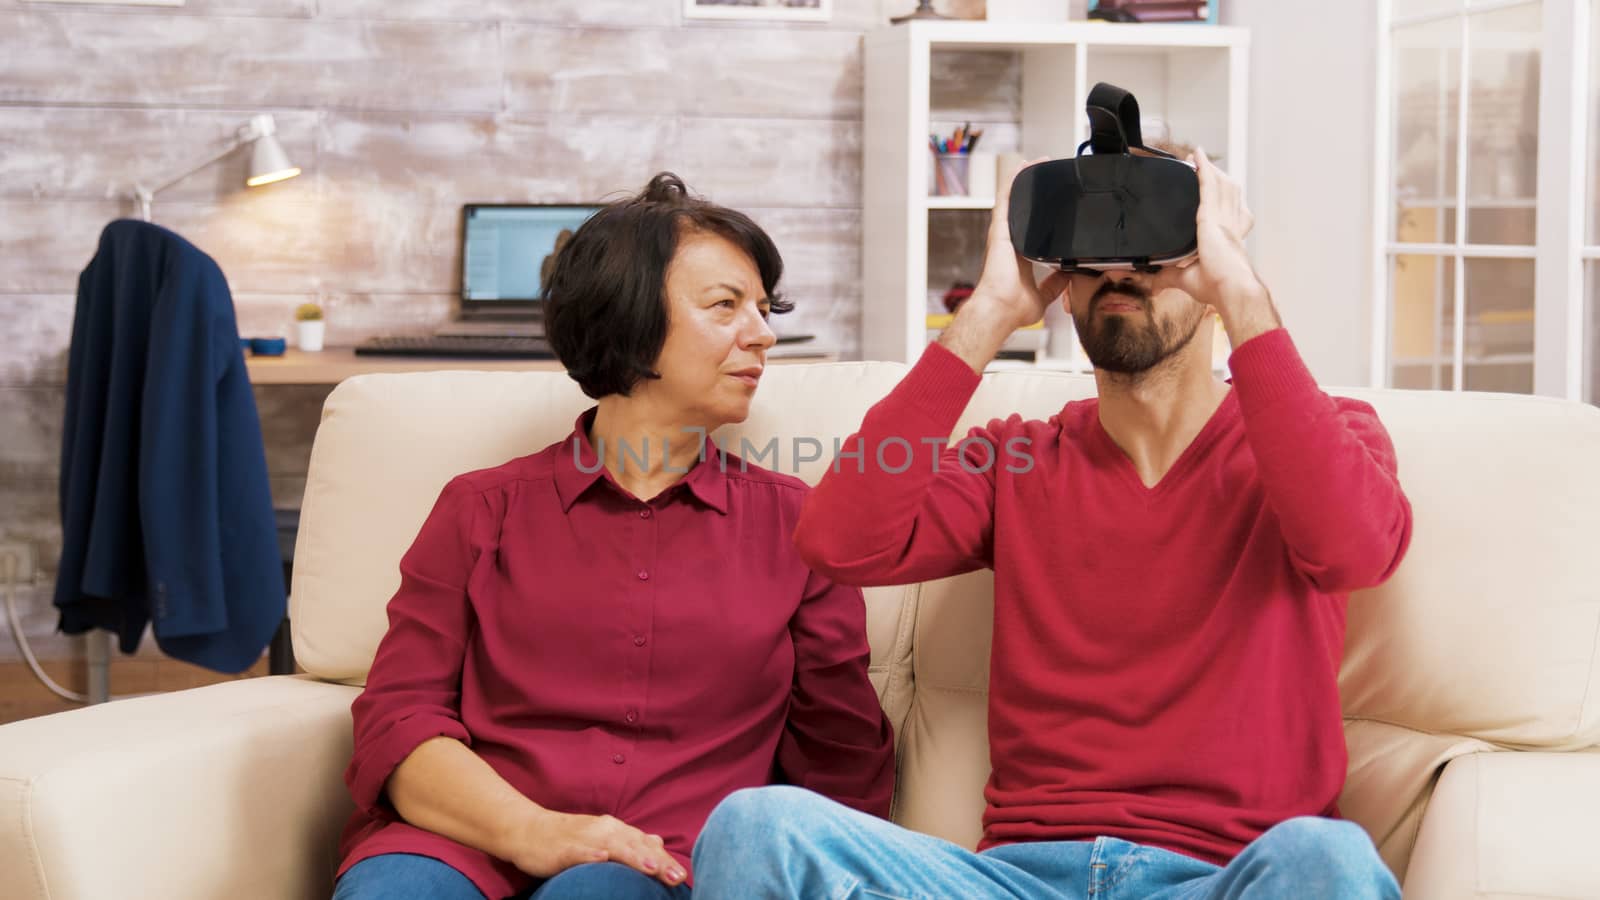 Nephew teaching his grandmother how to use virtual reality headset in living room